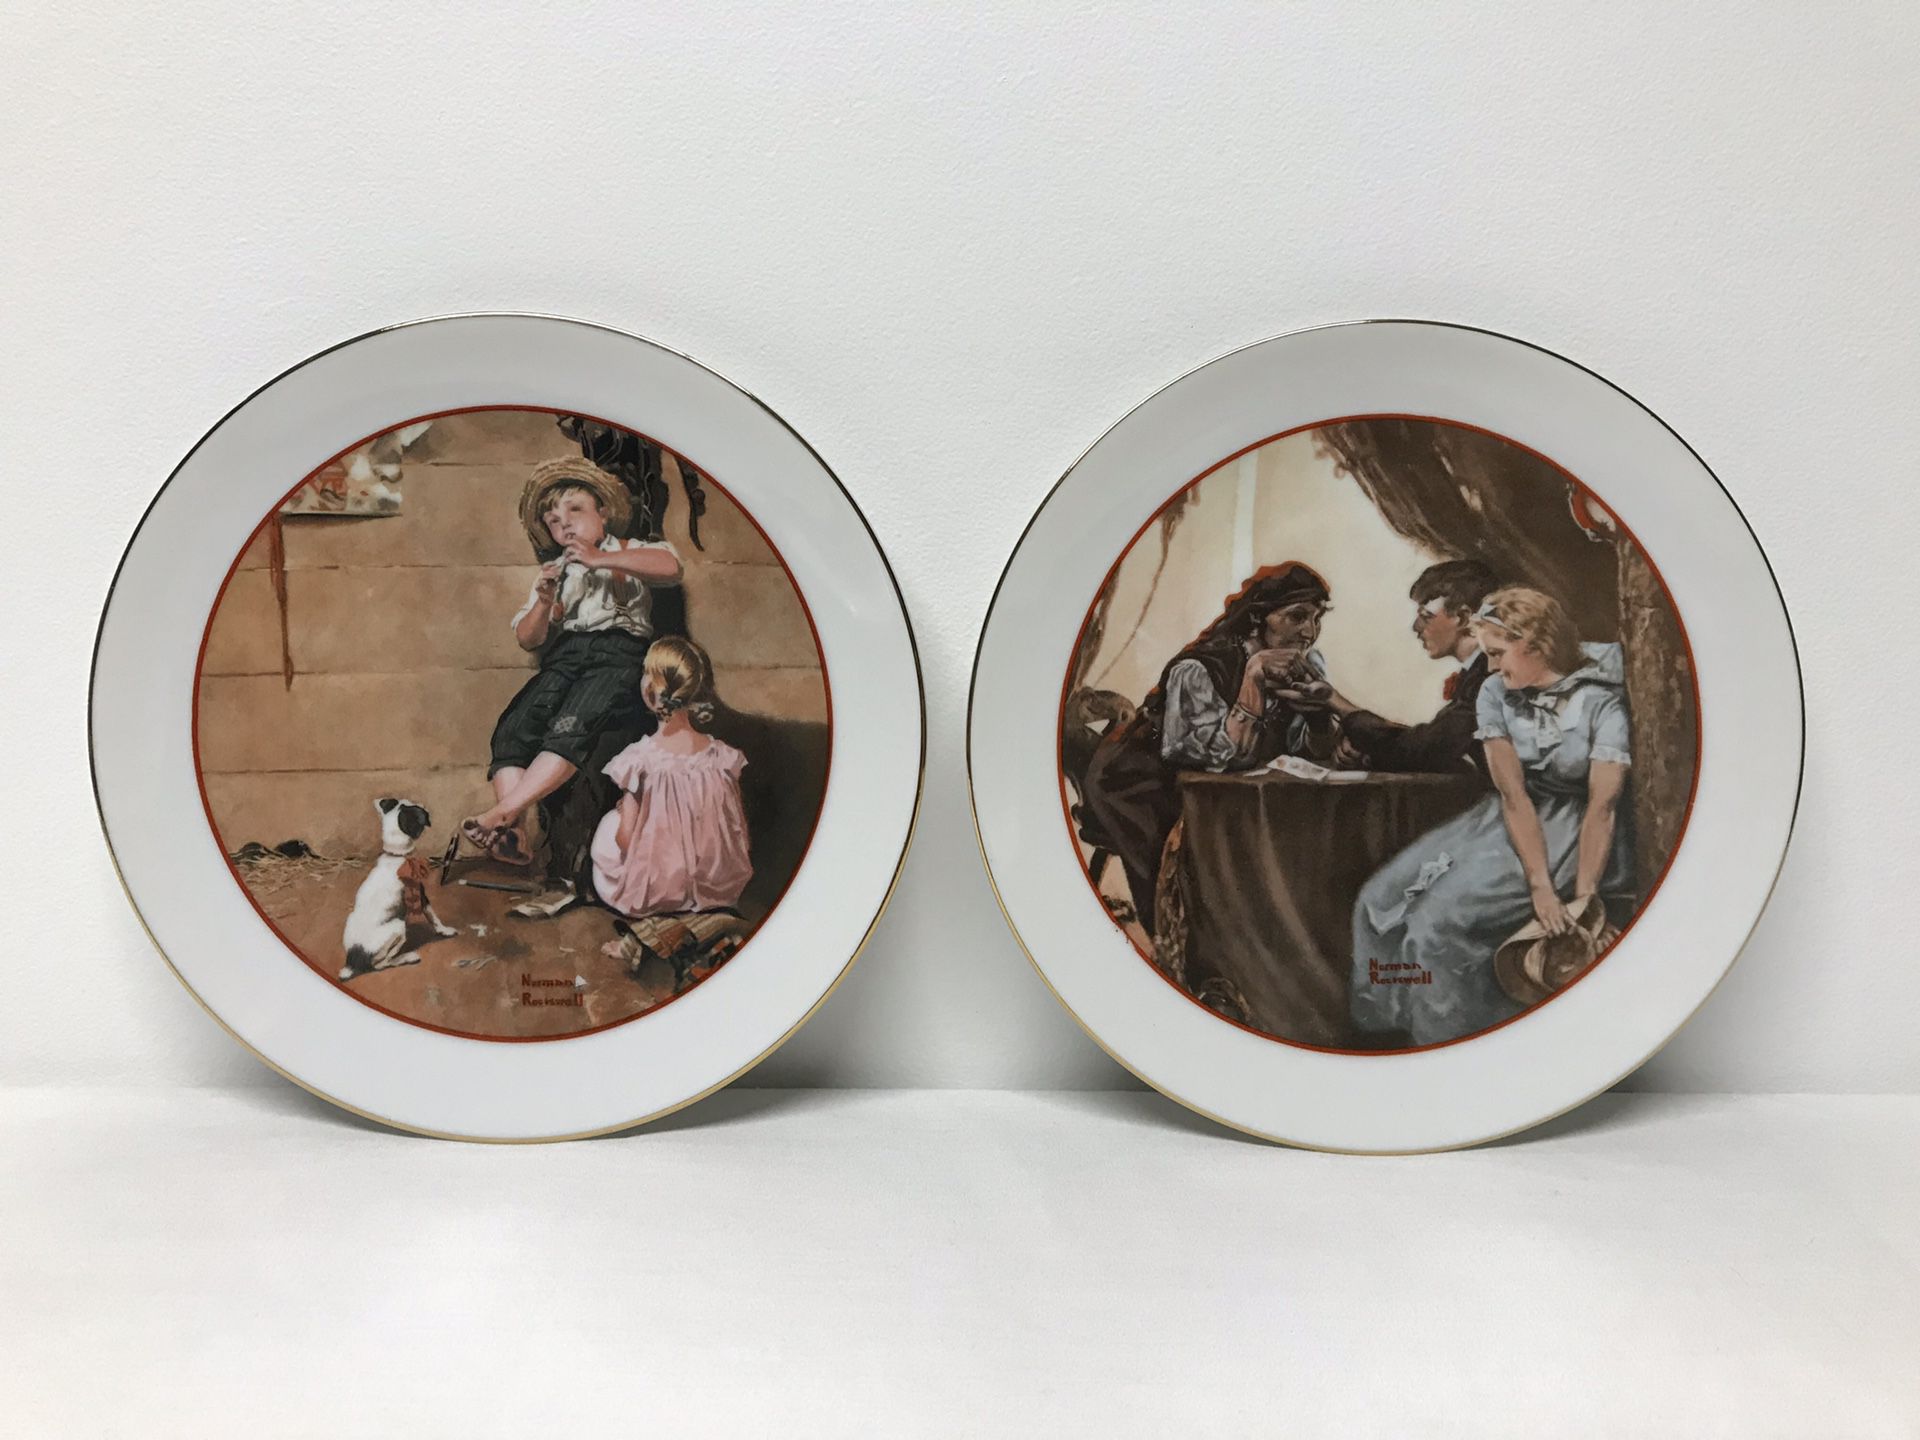 Norman Rockwell “Young Love” Series Decorative Plates - 1982